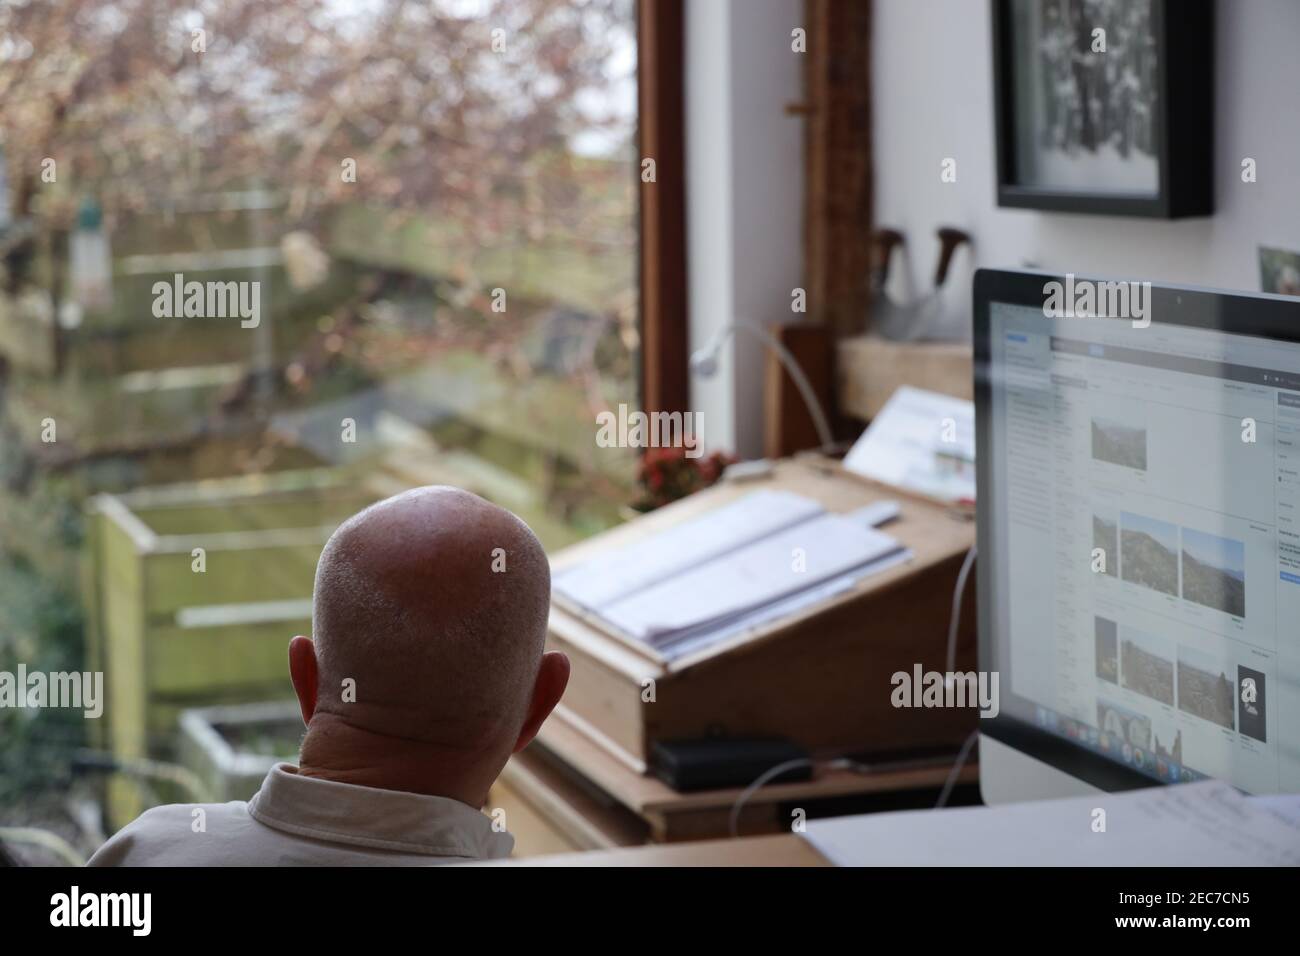 Man working during Covid 19 virus lockdown. Distracted from work on the computer by birds outside. Housebound incarcerated activity. Trapped inside. Stock Photo